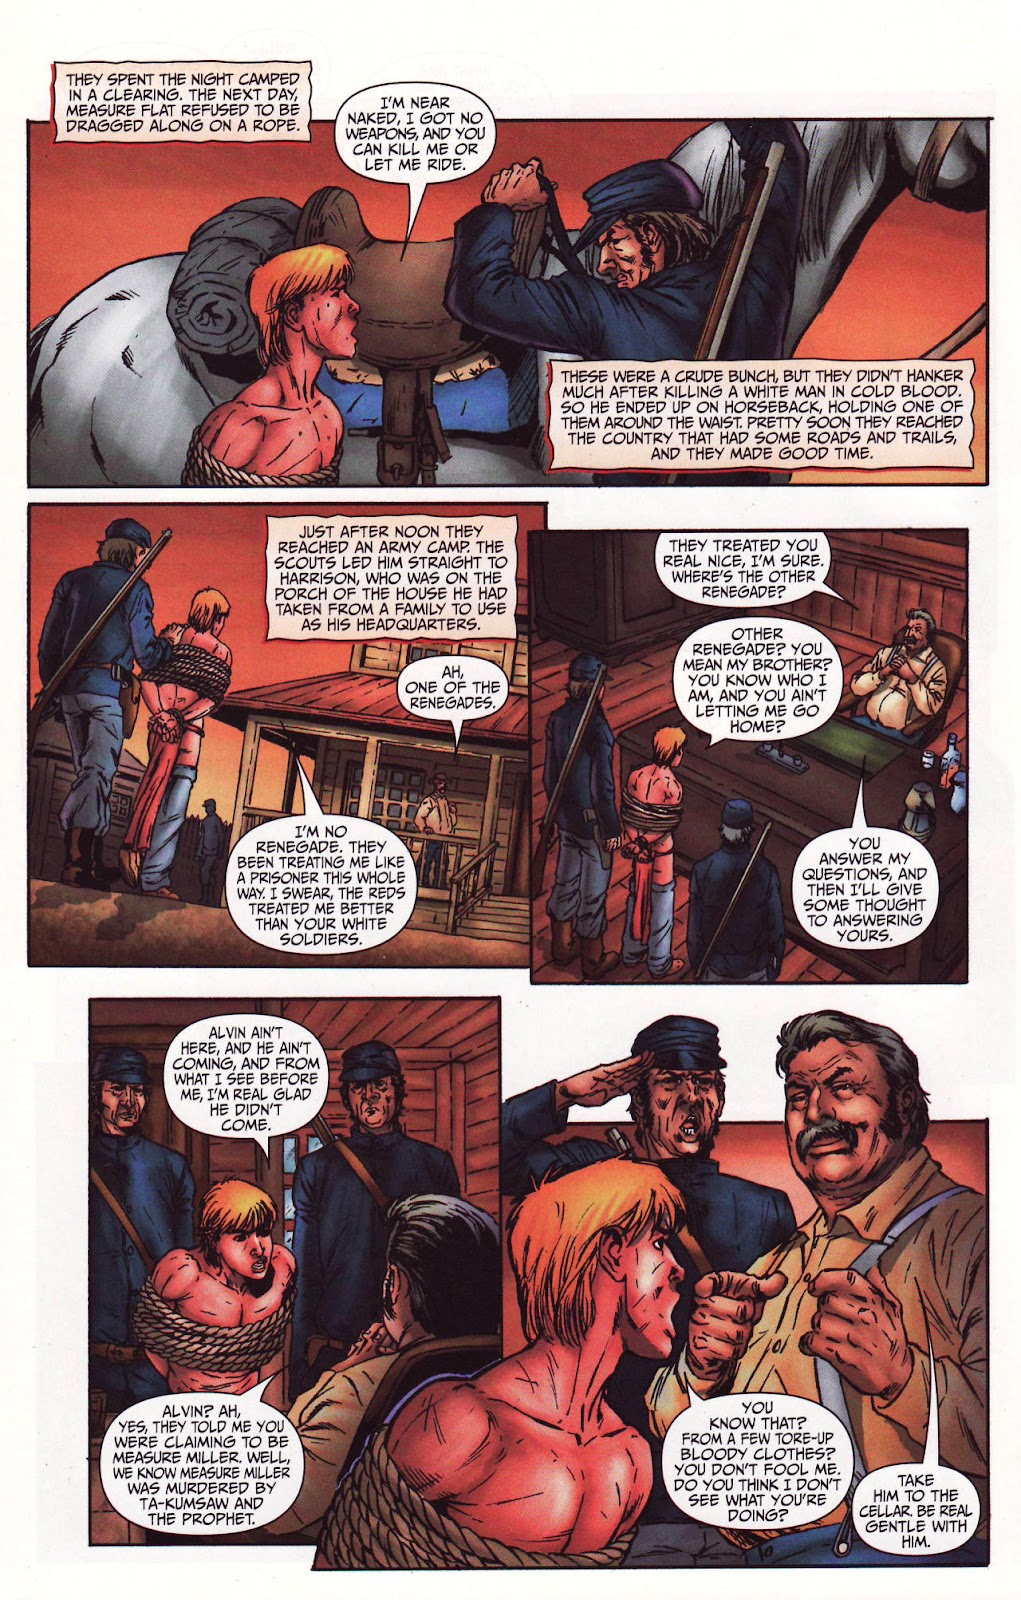 Red Prophet: The Tales of Alvin Maker issue 8 - Page 10